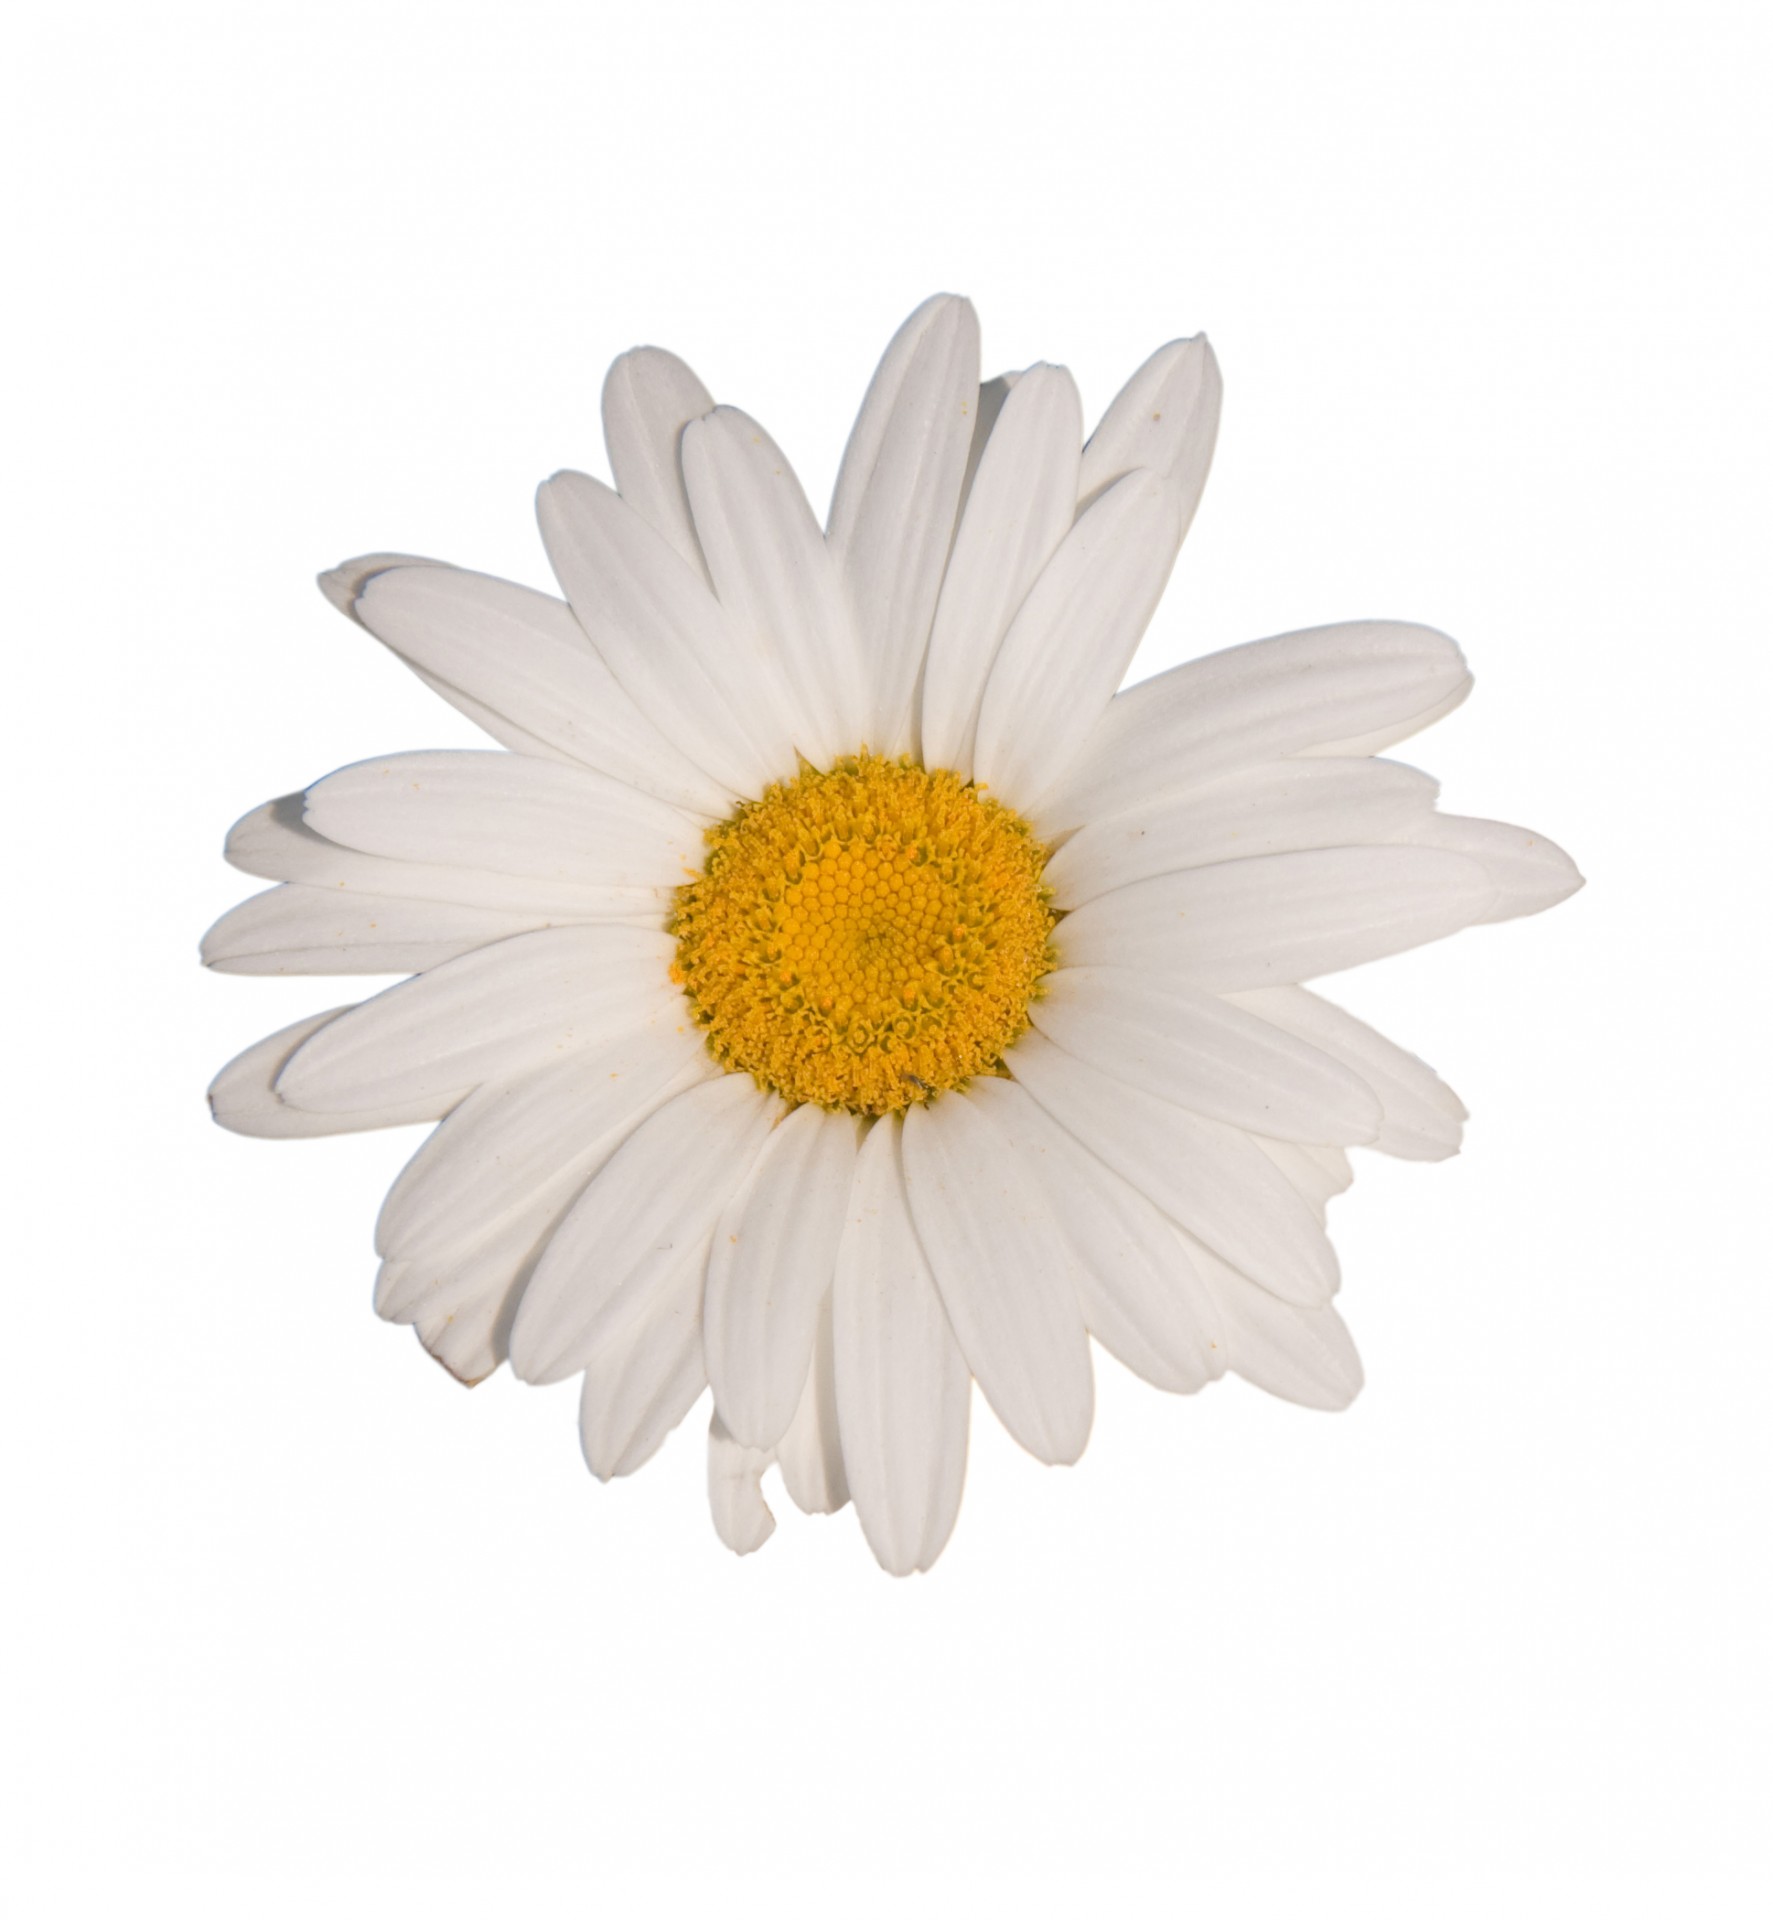 Daisy Flower White Background Free Stock Photo - Public Domain Pictures